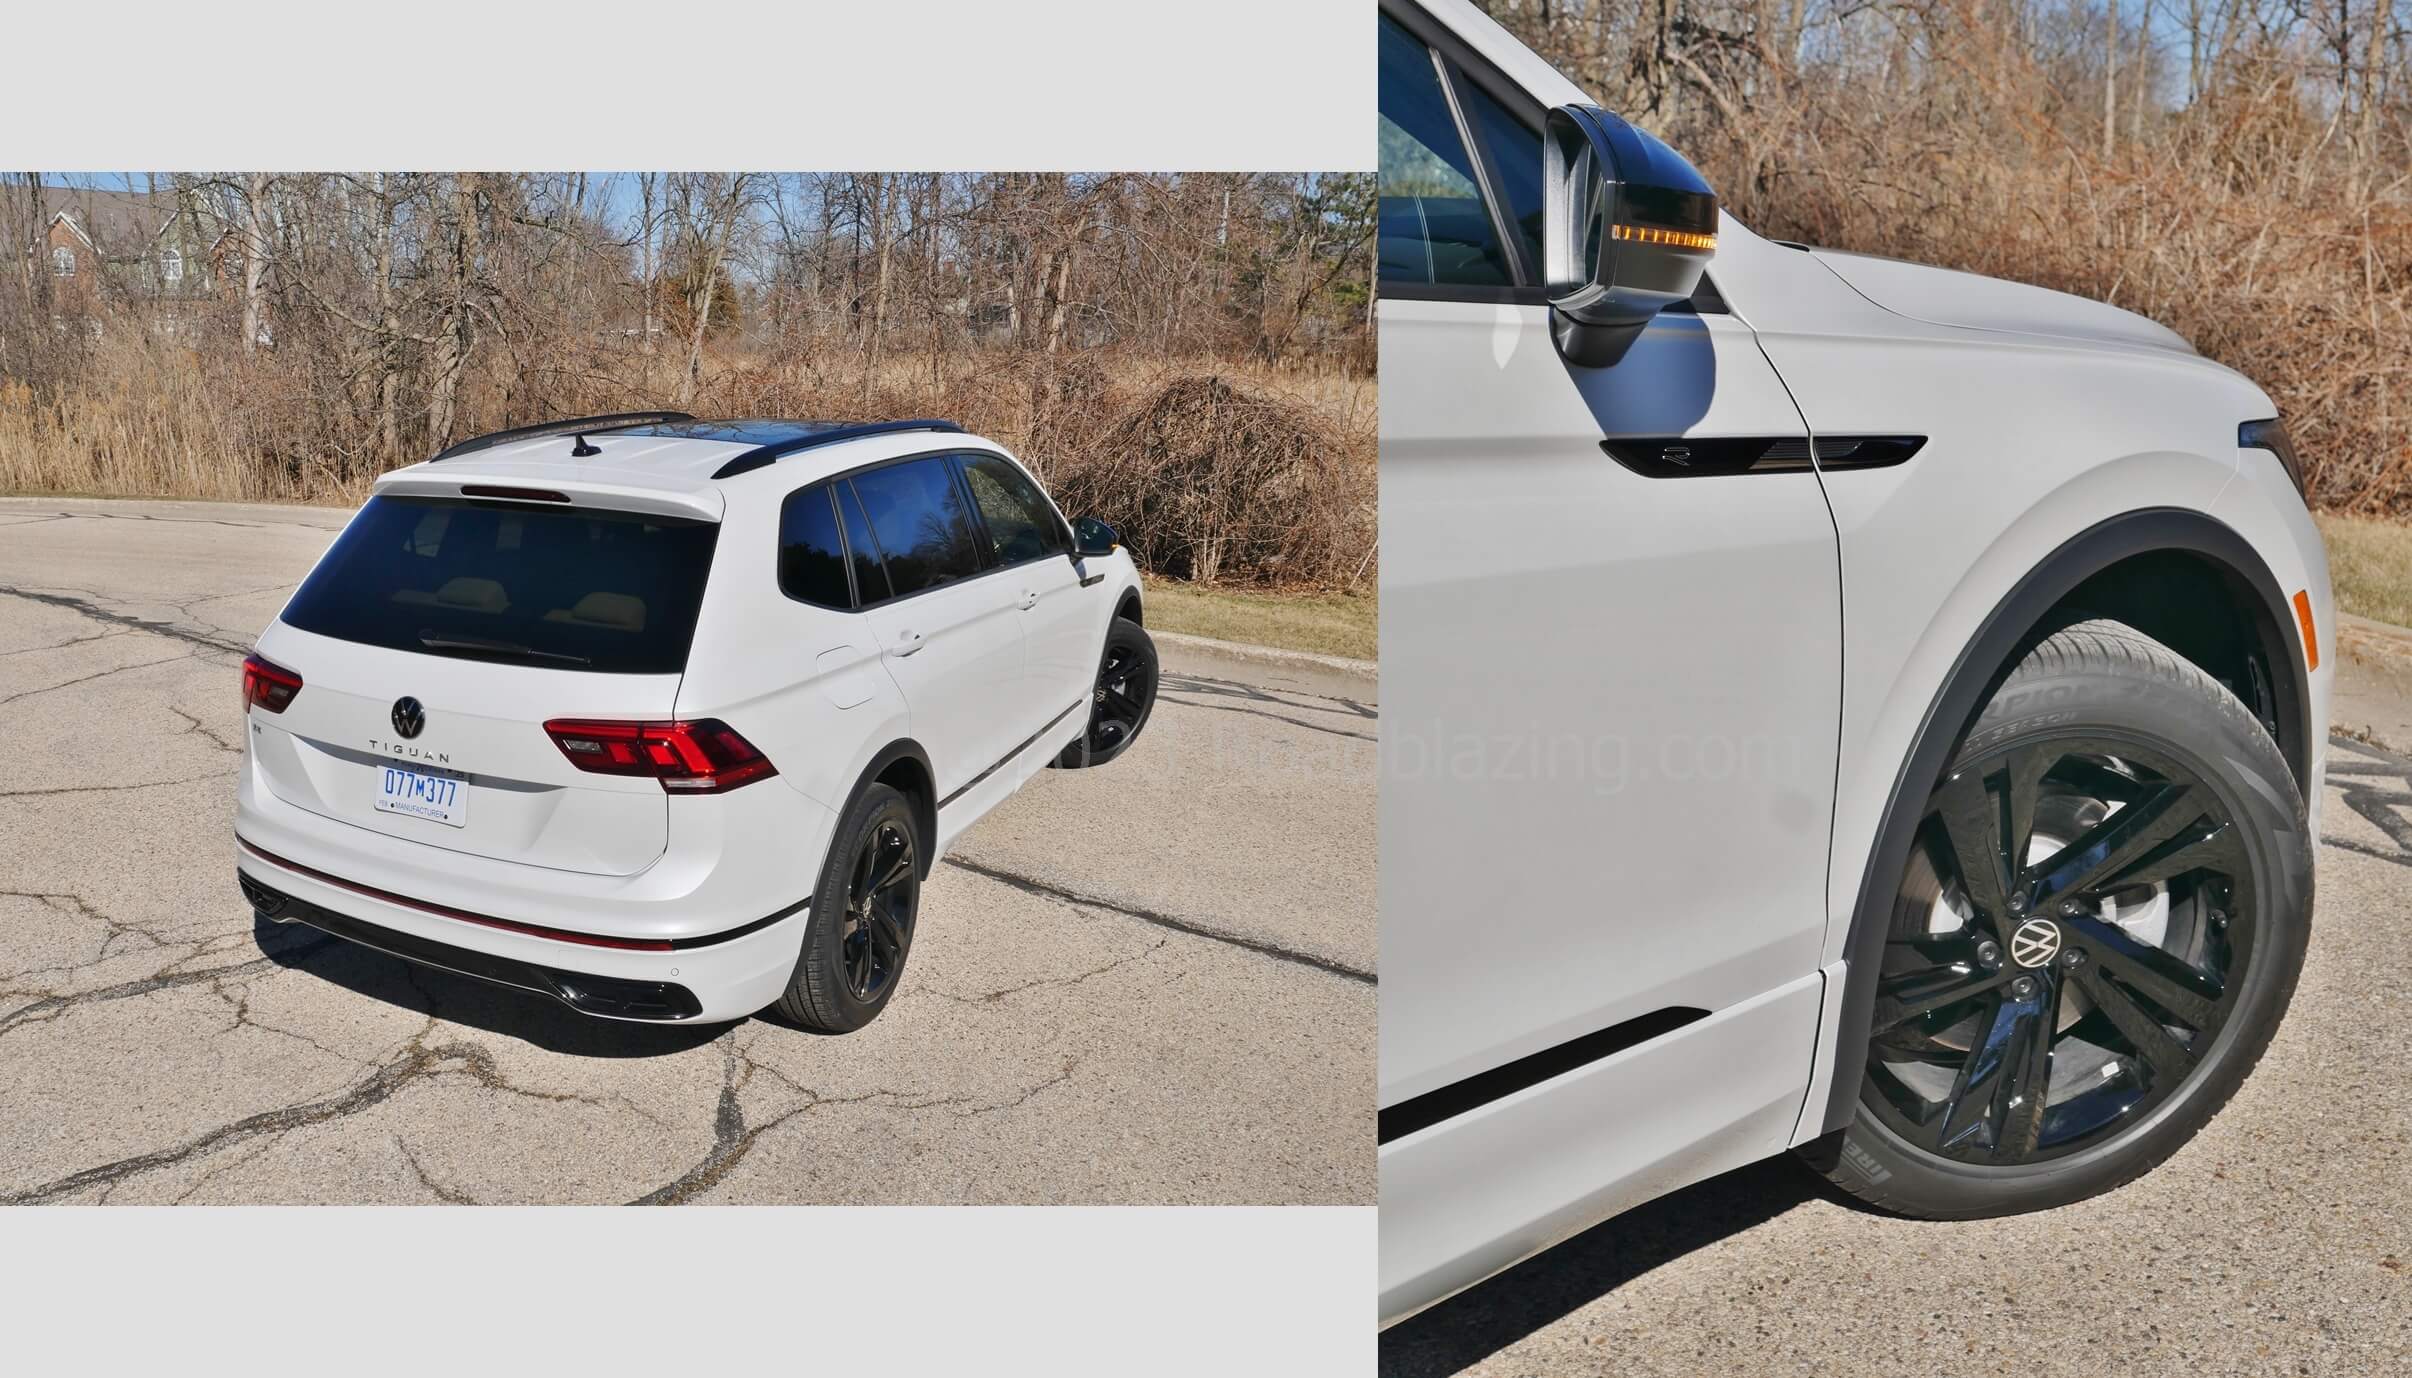 2023 Volkswagen Tiguan SE R-Line Black 3-Row: R-Line Black is exclusively available on mid SE trims.